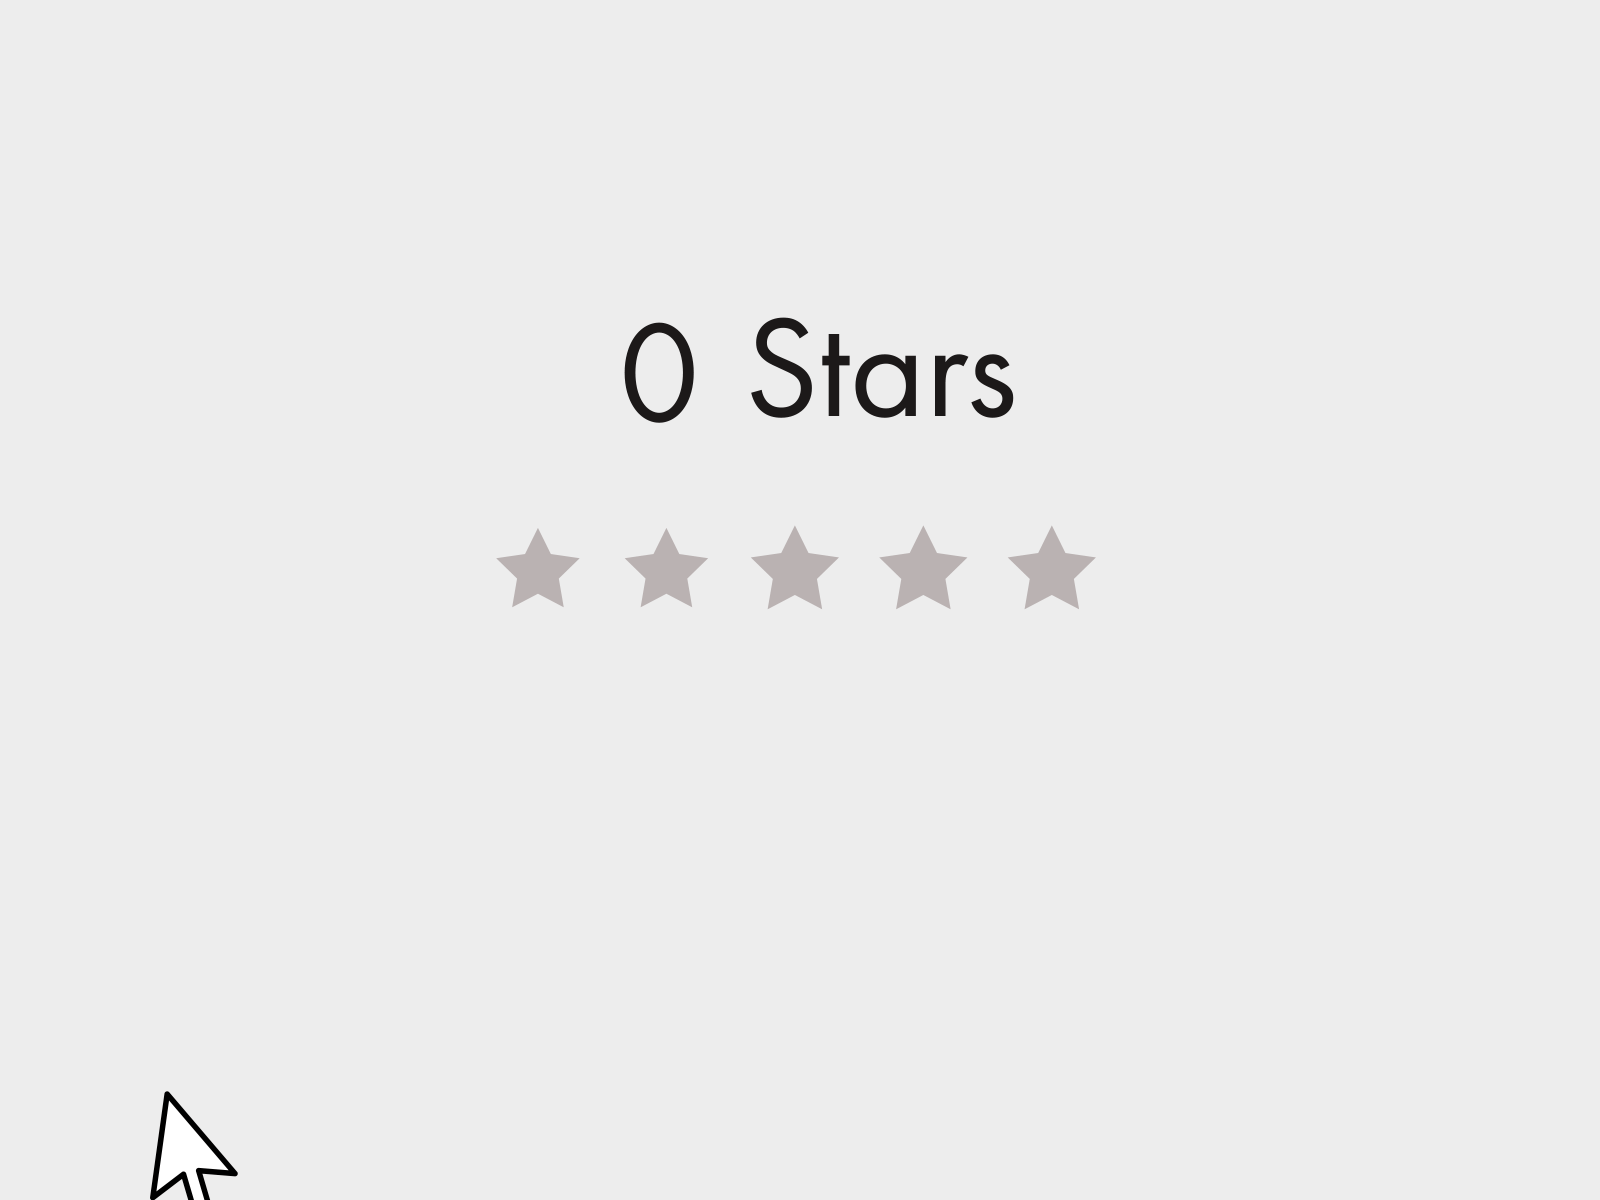 Sometimes you just want to give -1 stars